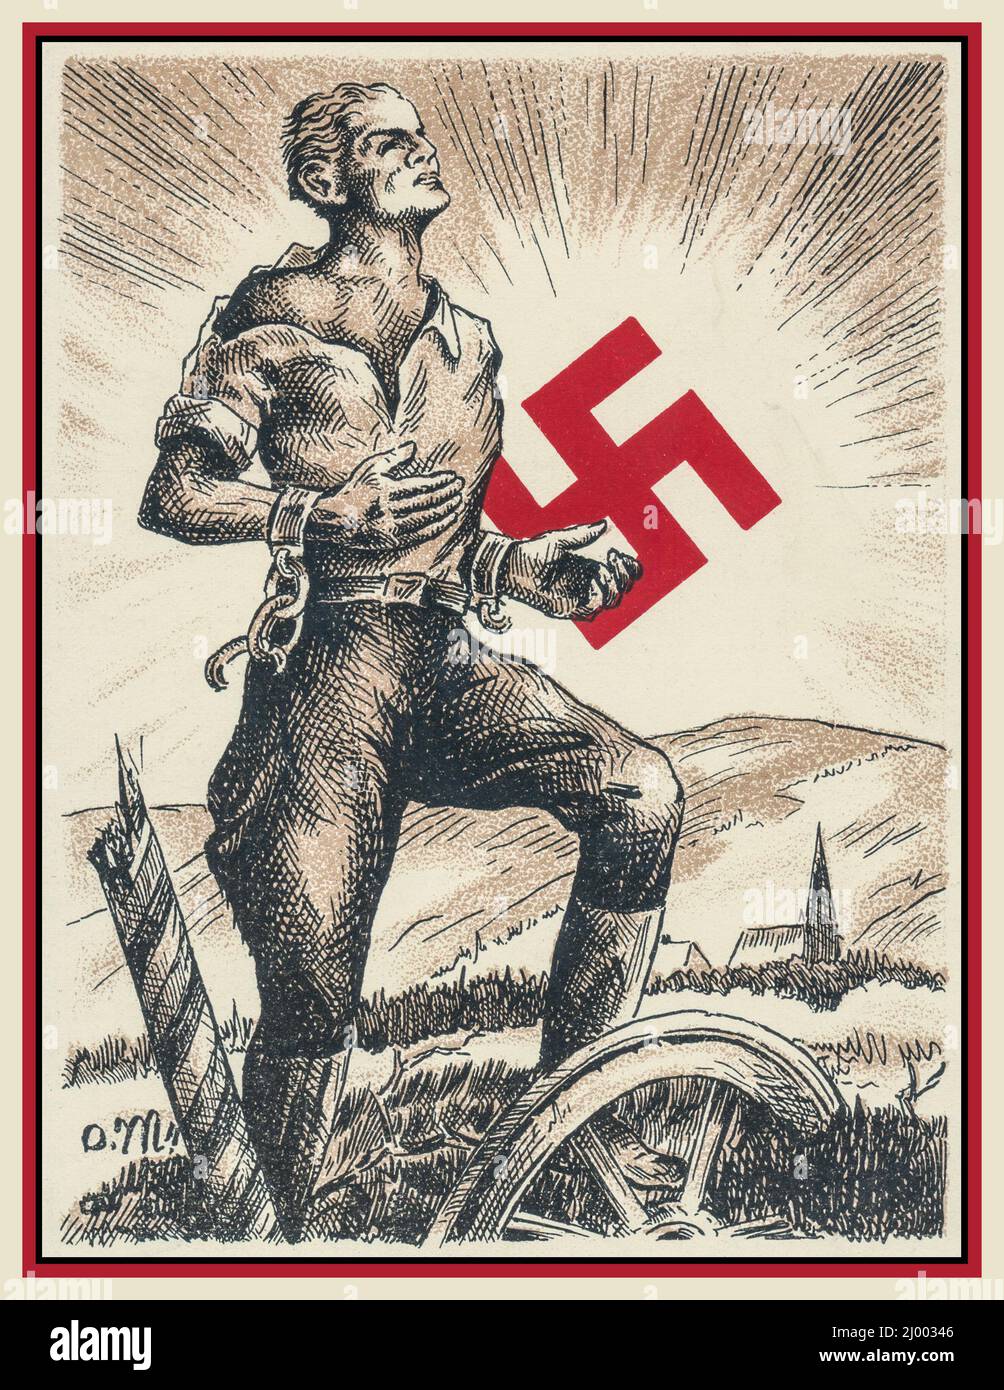 1930s Nazi Propaganda Poster Card illustrating a healthy fit blond aryan german youth breaking the bonds of yesterday and looking into the future with the German Nazi Party. The Swastika shown as a symbolic rising futuristic glowing sun. Nazi Germany Stock Photo